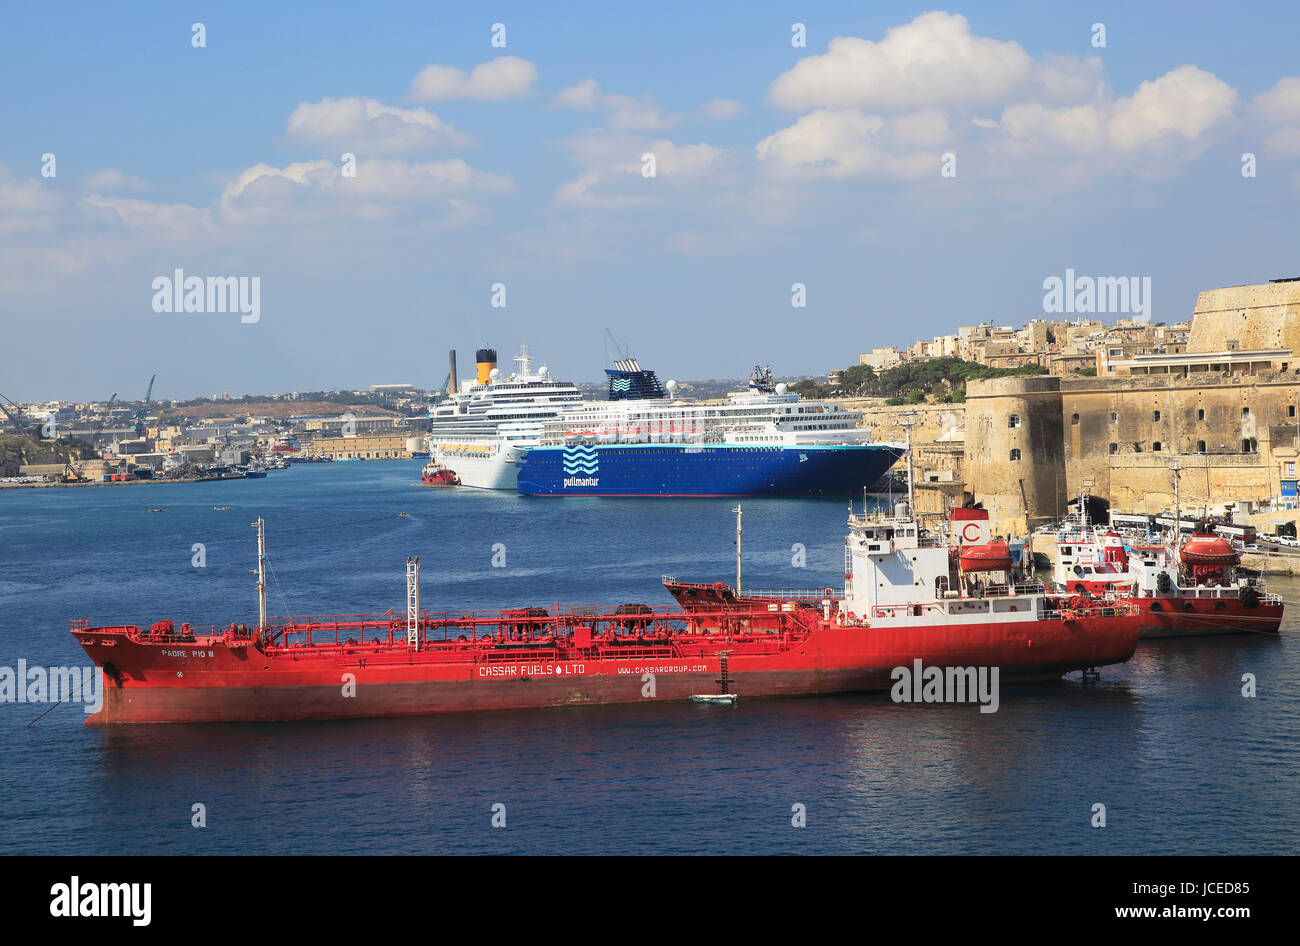 Merchant shipping and cruise ships in Grand Harbour, Valletta, Malta Stock Photo